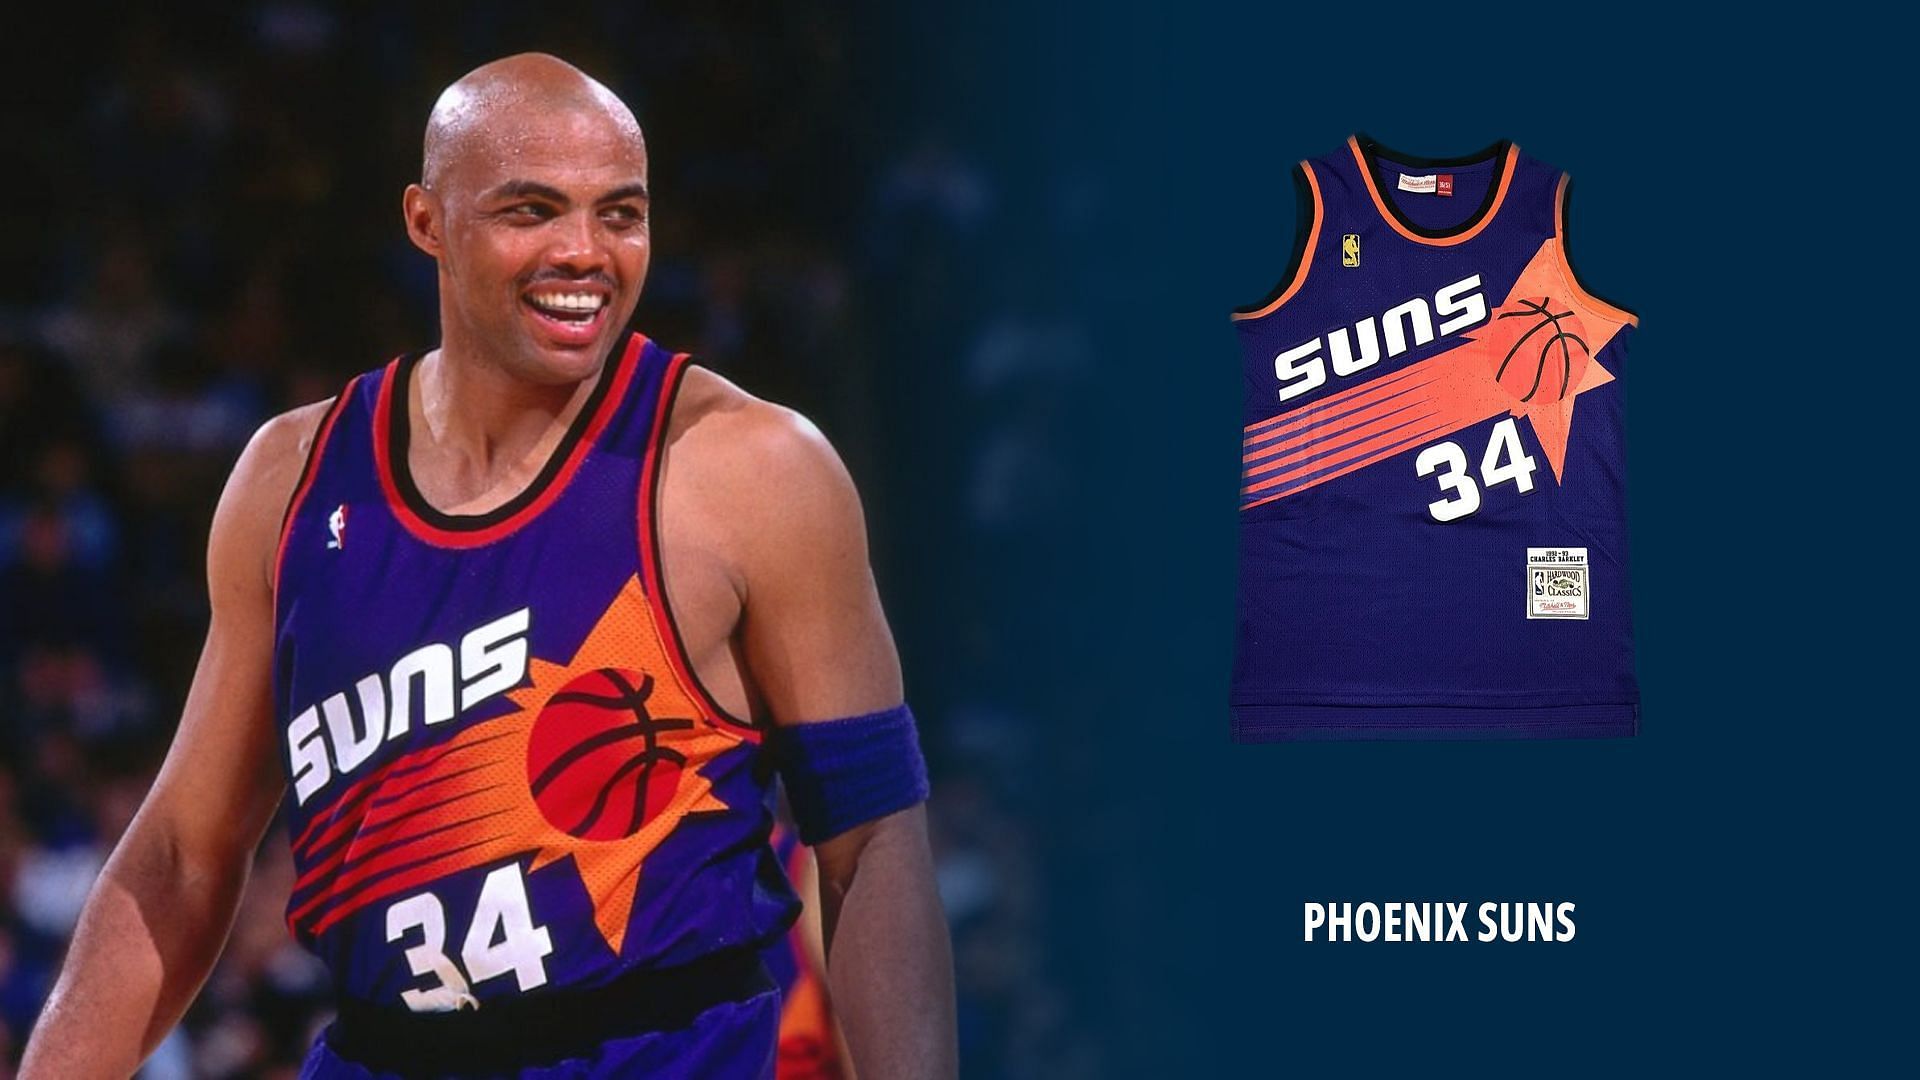 Charles Barkley wore some of the most iconic NBA jerseys during his prime